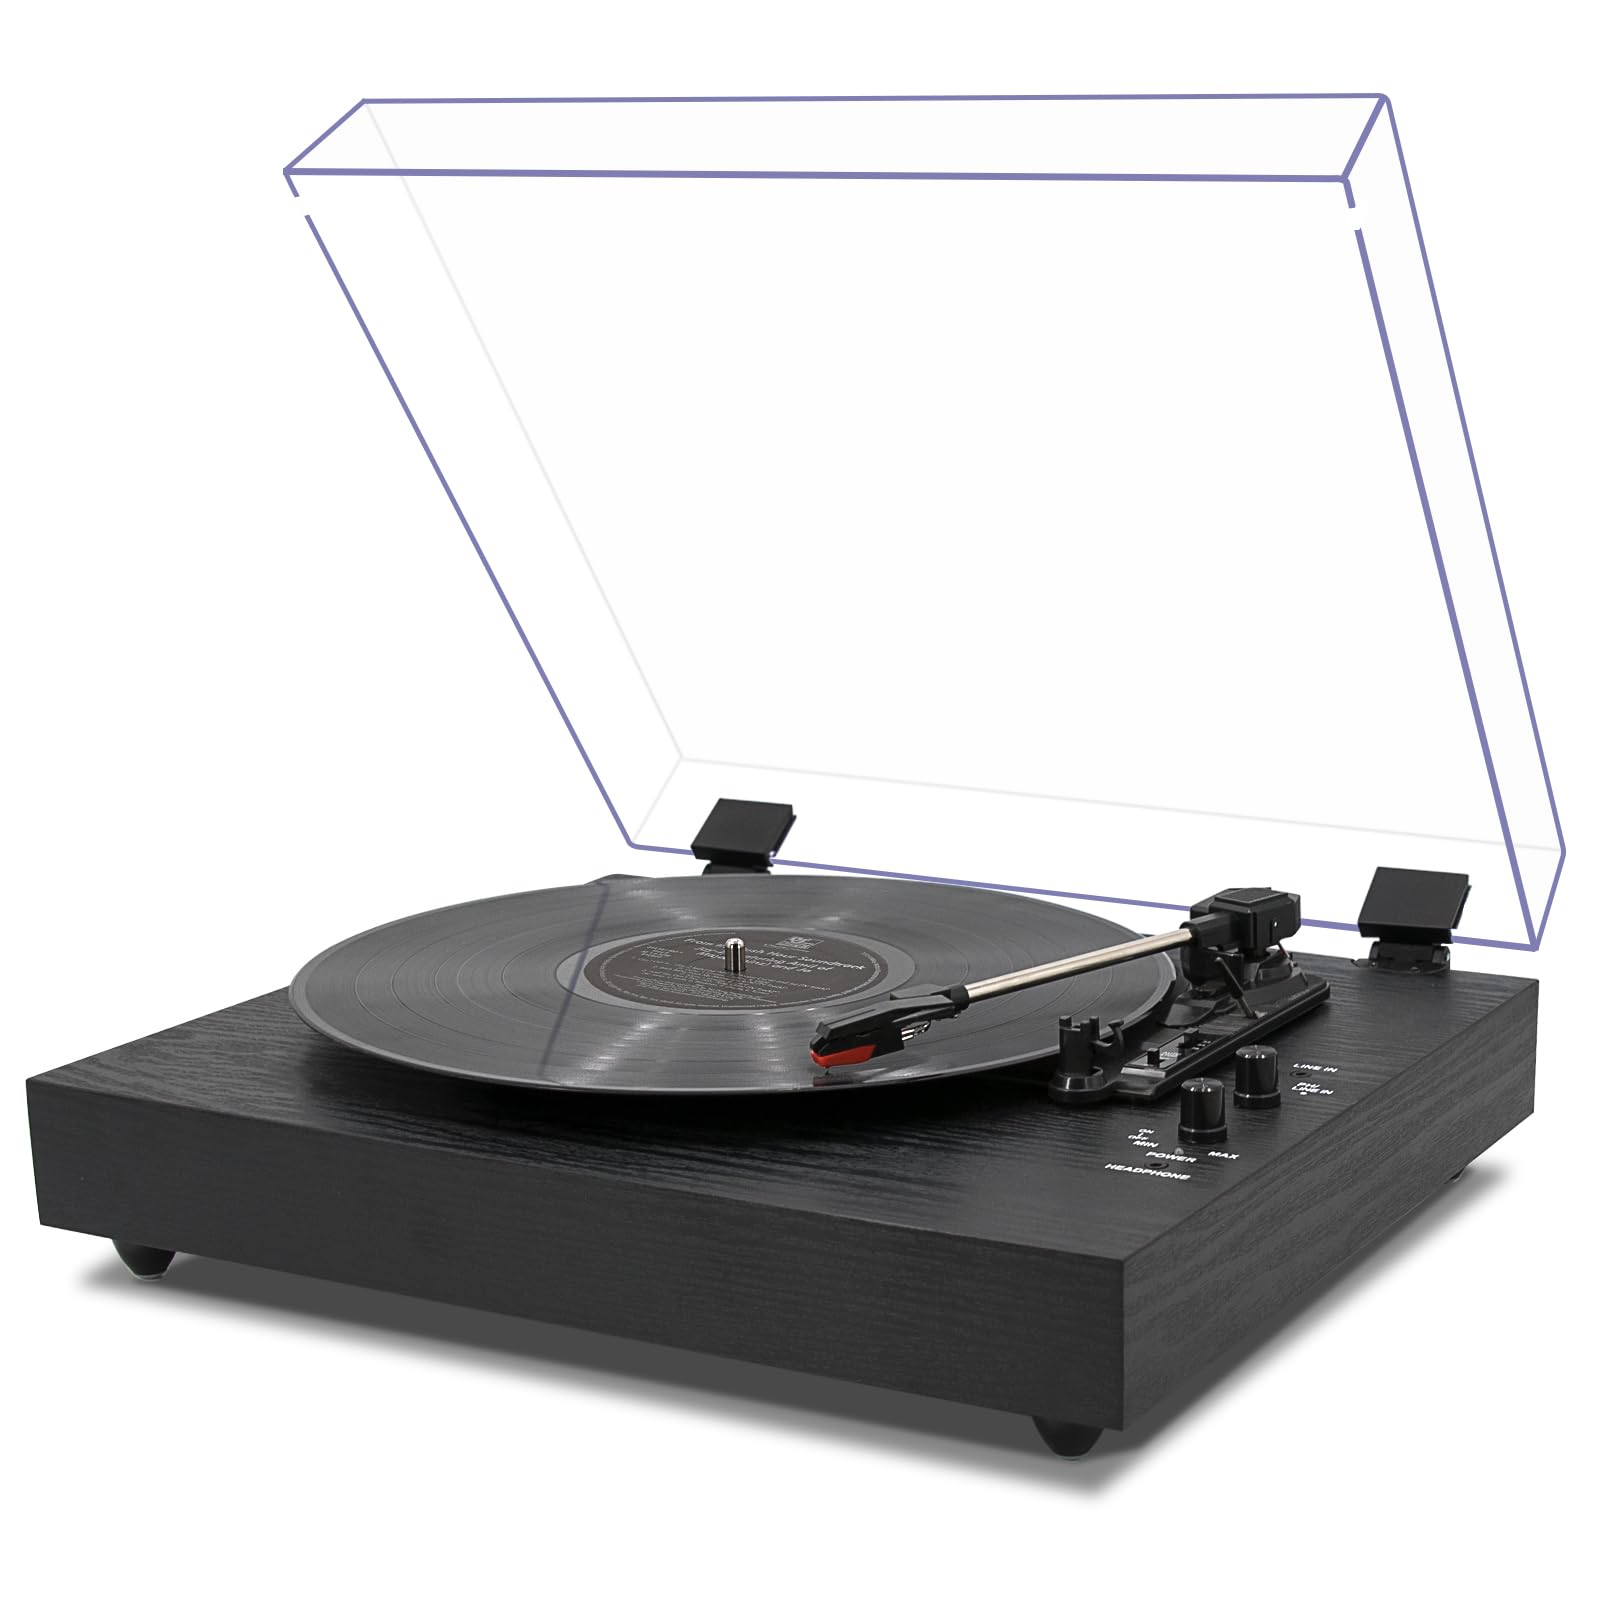 DIGITNOW! Turntable record player 3speeds with Built-in Stereo